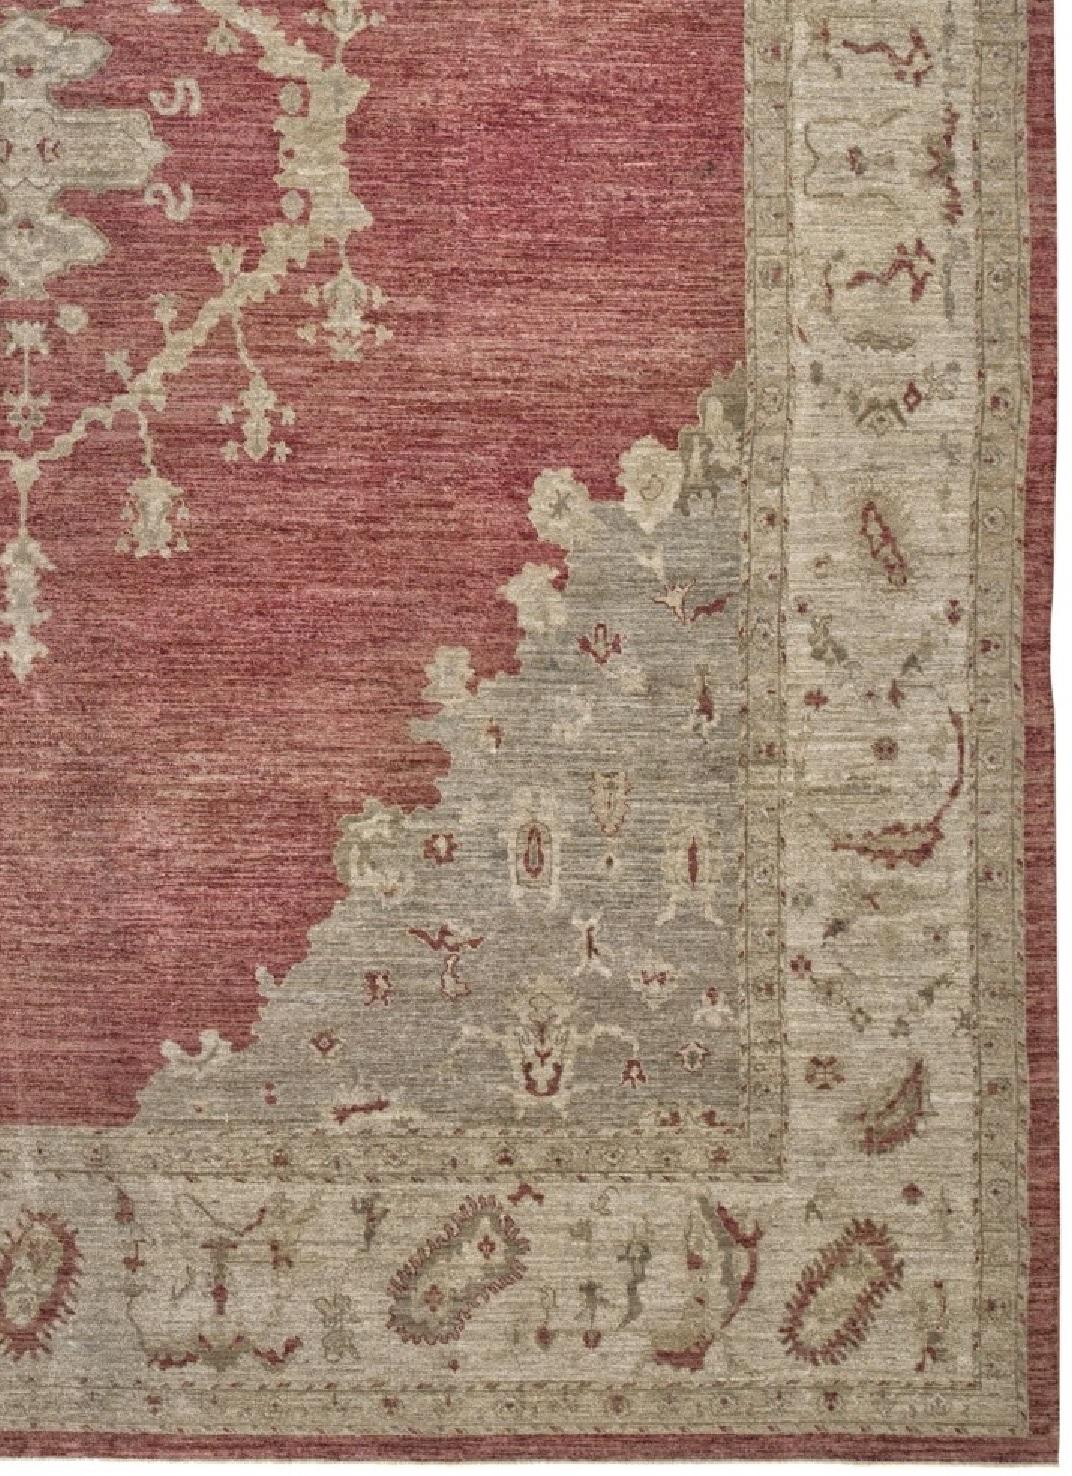 Red and Beige Antique Handmade Wool Distressed over Size Turkish Oushak Rug In Excellent Condition For Sale In North Bergen, NJ